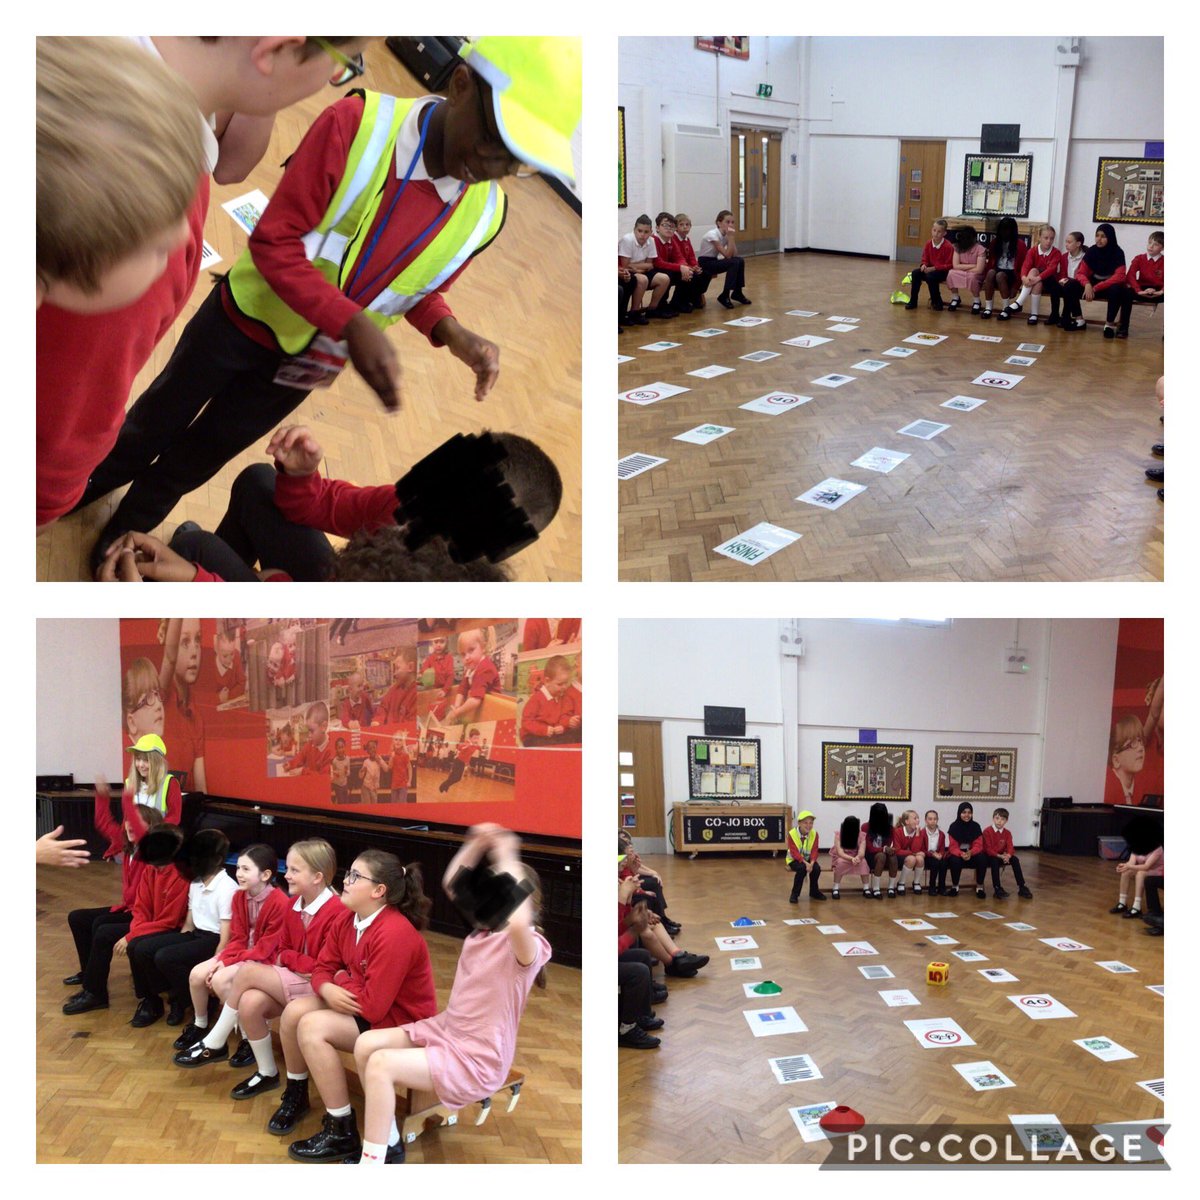 5B have started the day with a crucial road safety workshop! Remember STOP, LOOK, LISTEN, THINK 🛑 👀 👂 💭 #RoadSafetyWeek #roadsafety